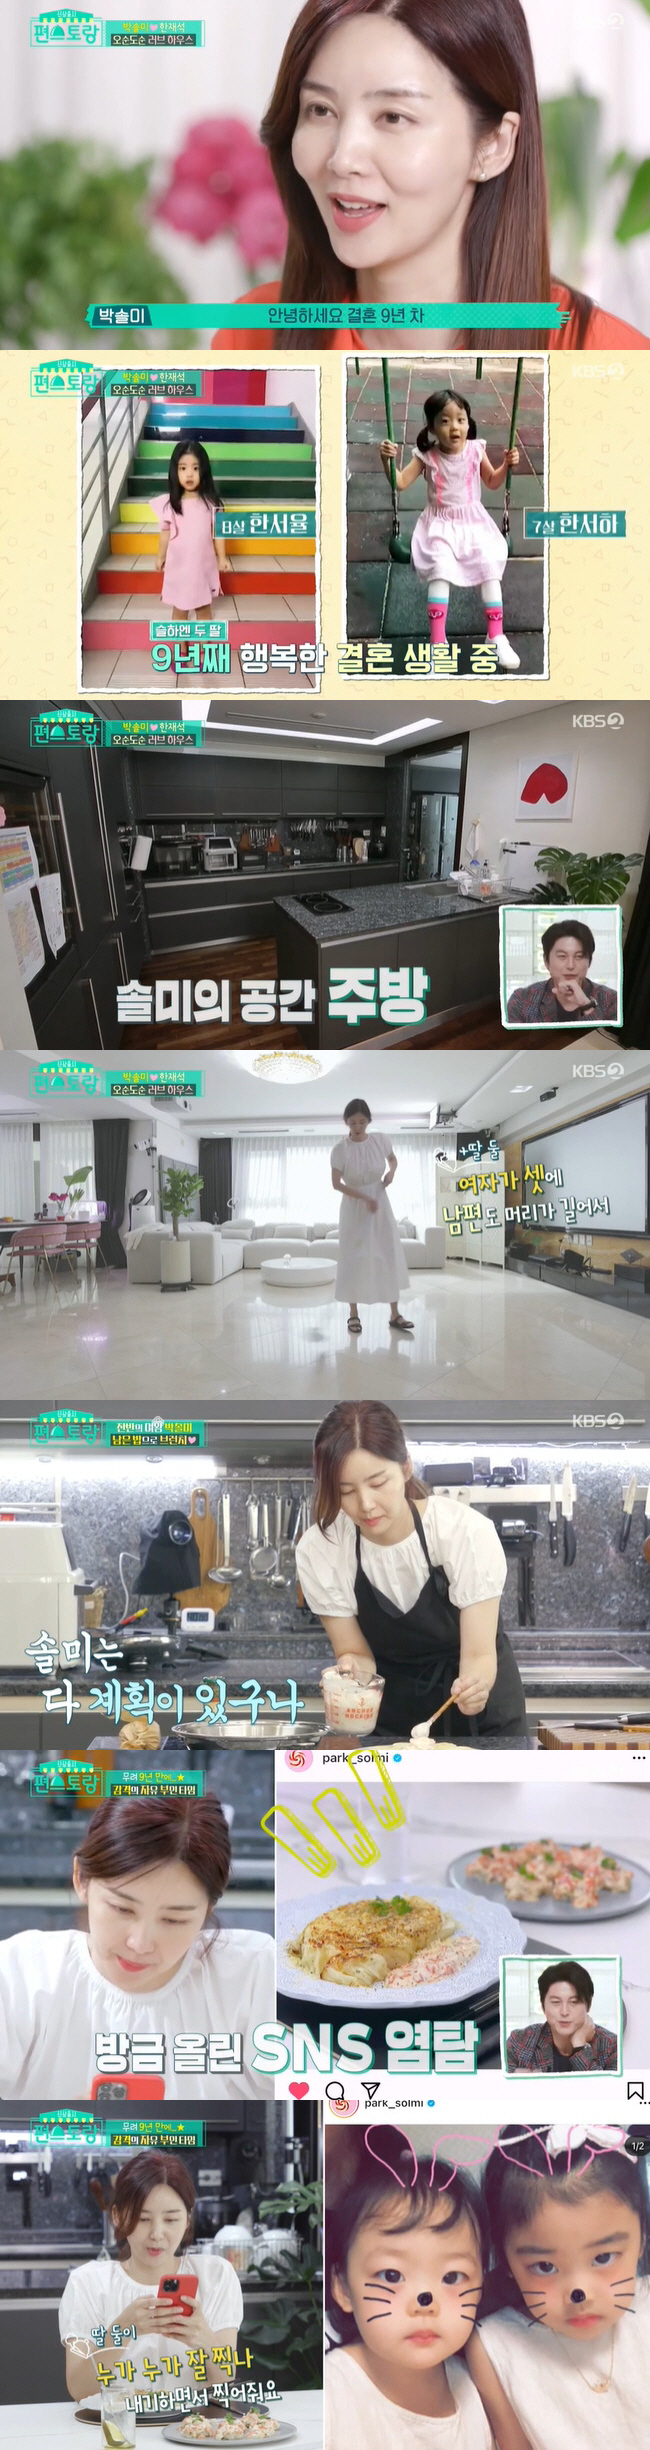 Actor Park Sol-mi first unveiled the house through Stars Top Recipe at Fun-Staurant.Park Sol-mi joined the new side chef on KBS 2TV Stars Top Recipe at Fun-Staurant (hereinafter referred to as Stars Top Recipe at Fun-Staurant) on the 5th.Park Sol-mi said, I am not a good cook, but I have been courageous. Ryu Soo-young lives next door, and Stars Top Recipe at Fun-Staurant.Ryu Soo-young said, I can not say that I will do it together someday, but (cooking) is huge. Park Sol-mi then laughed at her husband Han Jae-suks response to the appearance of Stars Top Recipe at Fun-Staurant, saying, I told him to do better than swimming.Since then, Park Sol-mi and husband Han Jae-suk have been released for the first time in the broadcast.White-toned living room and black-toned The Kitchen gave a chic yet neat feel.Especially in The Kitchen, a space of Park Sol-mi, the scent of Housewife 9th stage was abundant.The four-member family dish was neatly organized, as well as the perfect refrigerator arrangement for the cooking tools equipped by type.On the other hand, the freezer was empty, causing curiosity.Park Sol-mi said, I try to prepare good food for my family at that time. My house does not have a microwave.If you put it in the freezer, you will not eat it. Park Sol-mi said of his usual routine: Im on the whole day looking after my children.Children are 7 or 8 years old, and if they can not care for their children at this time or if they miss it, it is time to regret it. So much work is reduced and the children concentrate on the children.However, Park Sol-mi enjoyed the time of Free Lady alone without children on this day.Her husband Han Jae-suk had traveled with their two daughters for the first time alone; Park Sol-mi, who had her first free ladys time in nine years of marriage, was the first to start cleaning up.Park Sol-mi, who quickly cleared up the mess and finished cleaning every corner, then started cooking with leftovers left by his two daughters without a break.Park Sol-mi said: I couldnt throw away the kids leftovers.I just eat it, so I add new rice to the remaining rice and make a new dish. Park Sol-mi, who completed the fried rice and cabbage steak with salmon sauce on the fried rice, enjoyed a wonderful breakfast alone.Park Sol-mi, who was watching a photo comment on SNS afterwards, found a netizens comment praising the equivalent look.My daughters took it; I gave it hard training; I take it while Im betting whos good, Park Sol-mi said of the recent equivalent look photo.Park Sol-mi worried about her daughters who went on a trip without a mother even in the free time she had for the first time in nine years of marriage.I think this is the first time I have had a baby in such a relaxed morning, but I thought I would be so relaxed and happy, but I am not comfortable.I have to do my personality alone, I do 100% without any helpers, he said. When I shoot at dawn, I go to bed with rice and side dishes and go out quickly.I want to leave it now, but it is not easy to let go because it has become a daily life for 9 years. After breakfast, Park Sol-mi made a three-piece set of side dishes for the kids straight away.Park Sol-mi, who quickly made a side dish with his quick hands, wondered when he said, Carrot of fear while chopping carrots. I was chopping carrots seven to eight years ago.I picked it up and put it on the sink and went to the hospital and attached it. But I still have no sense of injured fingers. Park Sol-mi, who finished washing dishes directly without using a dishwasher, then started making his favorite hostess, paws.Park Sol-mi, who is usually a paw mania, simply completed the mini paw and bang show with Ssanghwa-tang.Park Sol-mi, who had a holy time after completing his own hog tips with his own honey tips, released a marriage behind-the-scenes story with Han Jae-suk, saying, I was marriage because of my feet.He said: In fact, after I set the marriage date, I gave a breakup notice.I asked Han Jae-suk to open the door and I did not open the door, but I opened the door and ate the paw without knowing that I had bought the paws, he laughed.Park Sol-mi also explained that her husbands nickname was a tiger because she said, My face looks like a tiger. But my husband saved me as a mother.Originally, I was a mother of Seo-yul and Seo-ha, but I just saved it as a mother. I would like you to call me Solmiya.